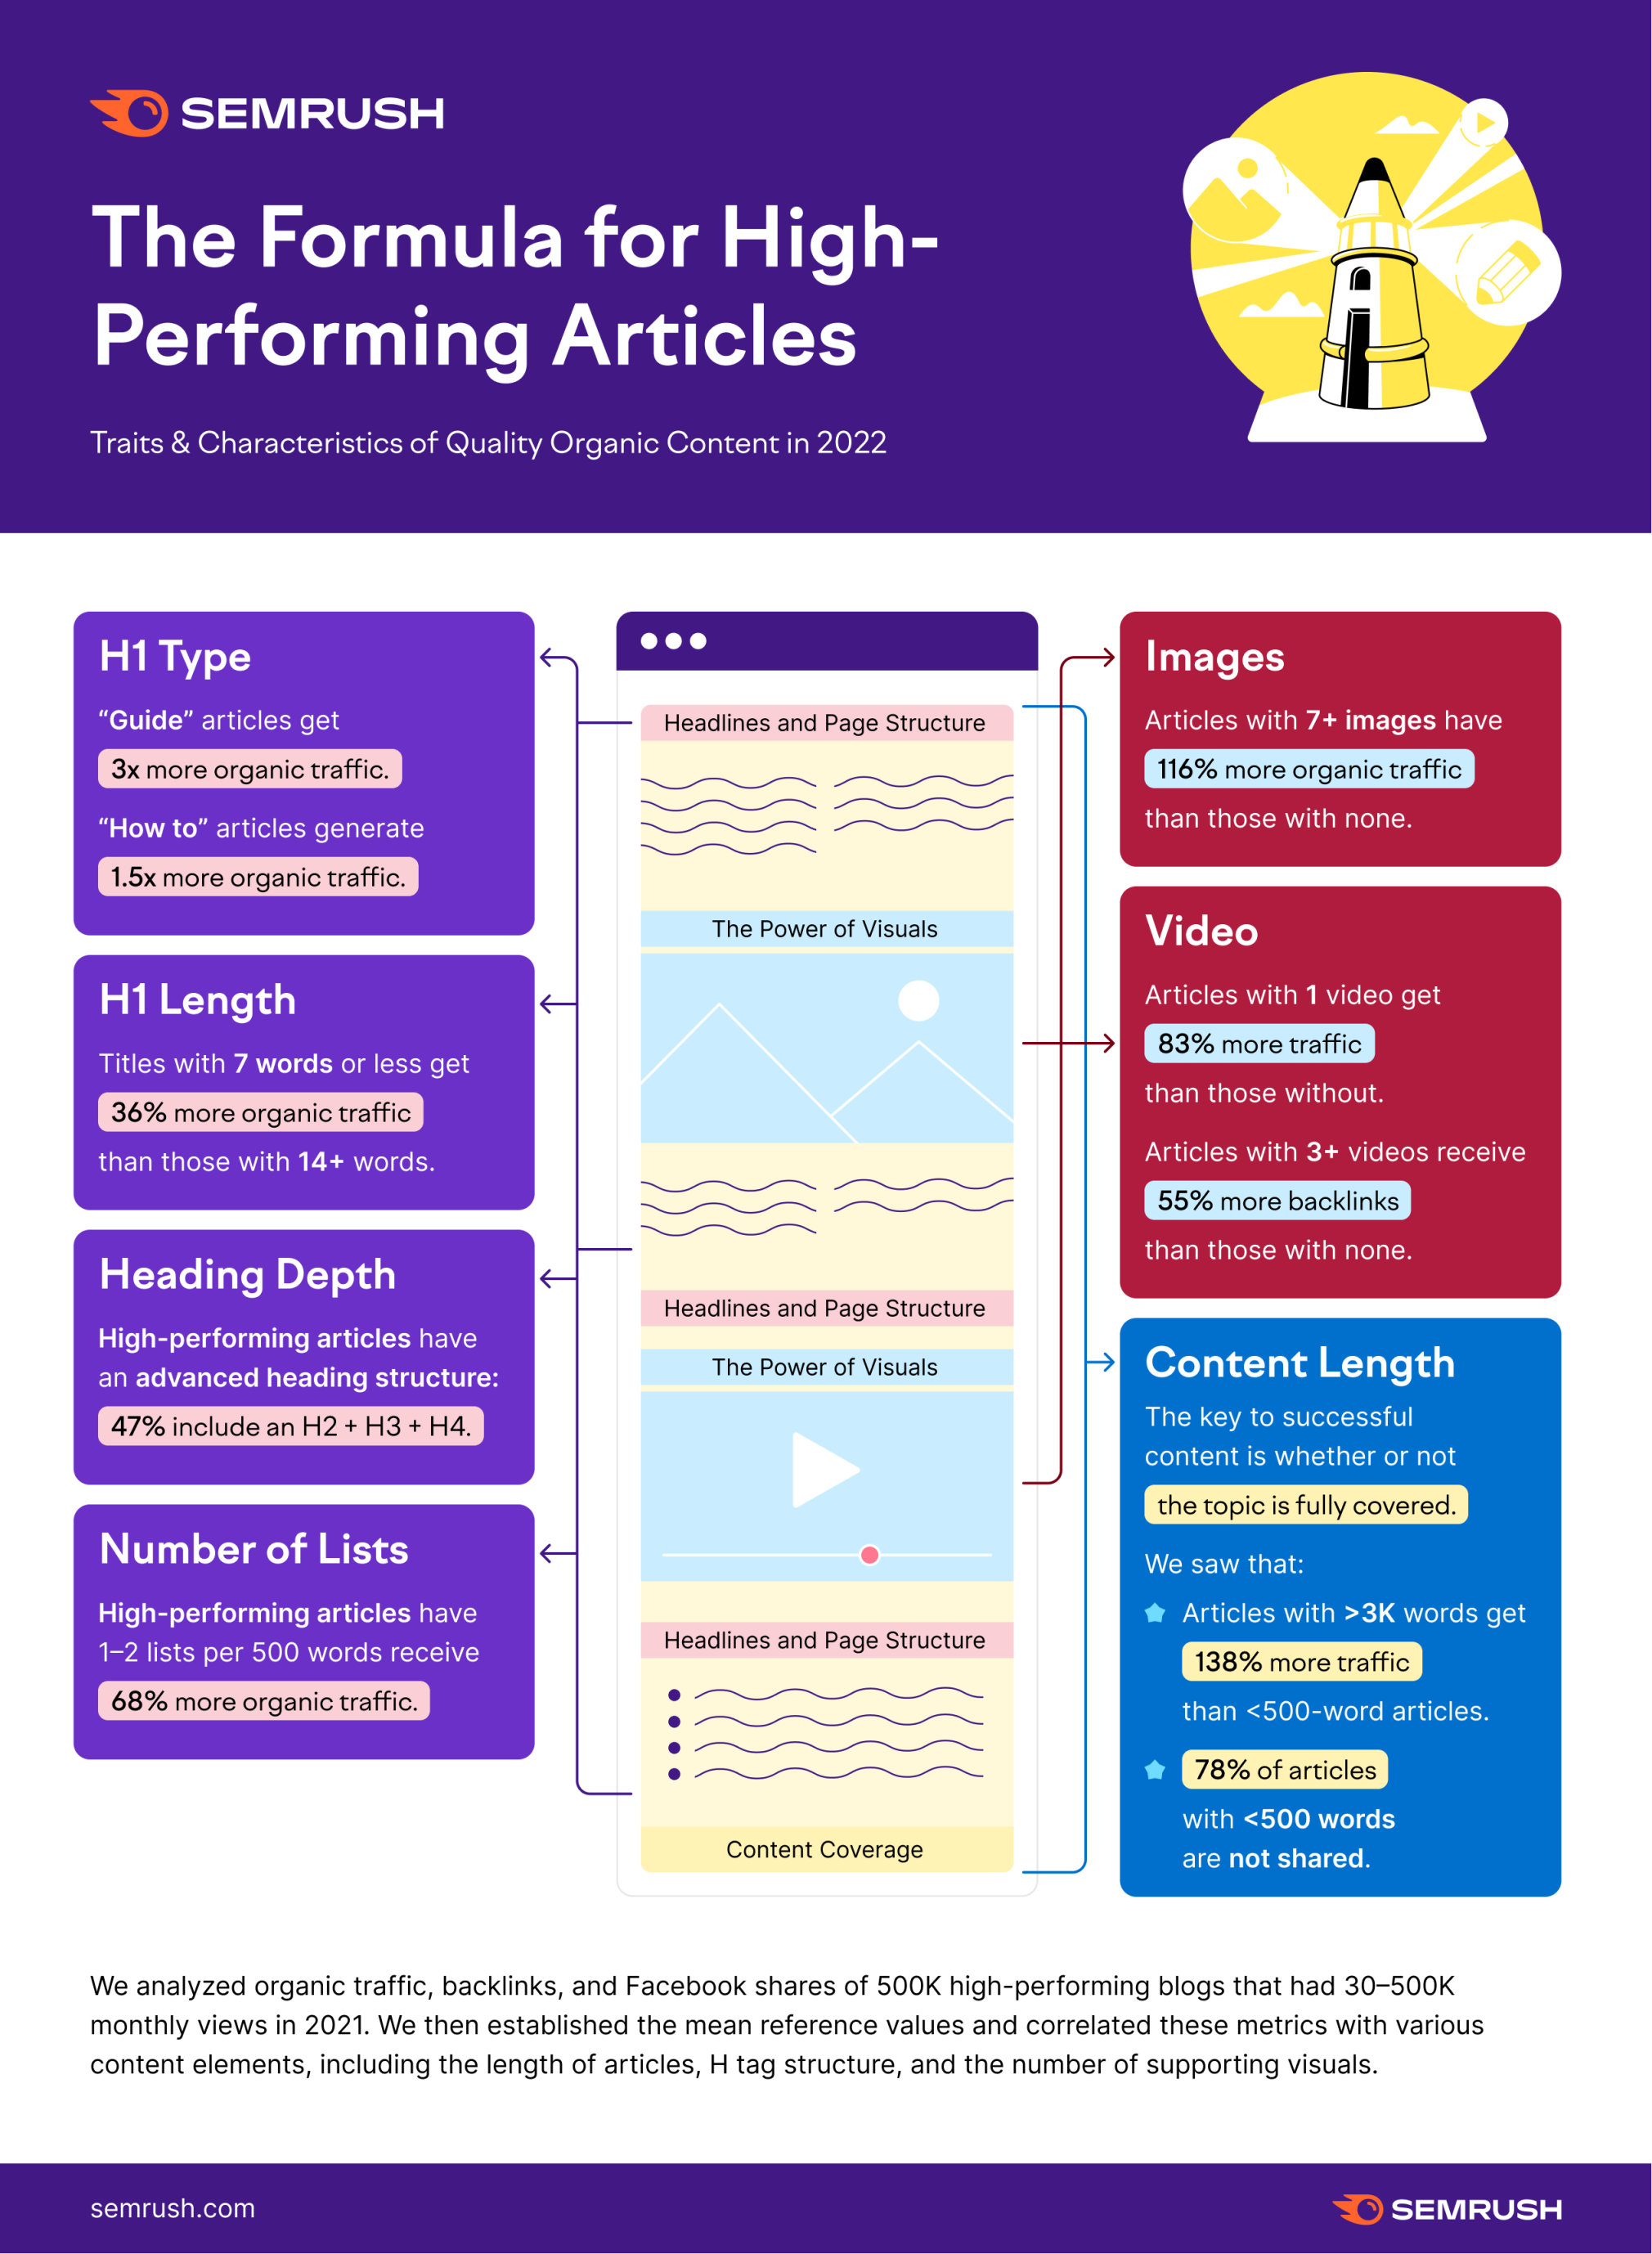 Anatomy of top performing organic content